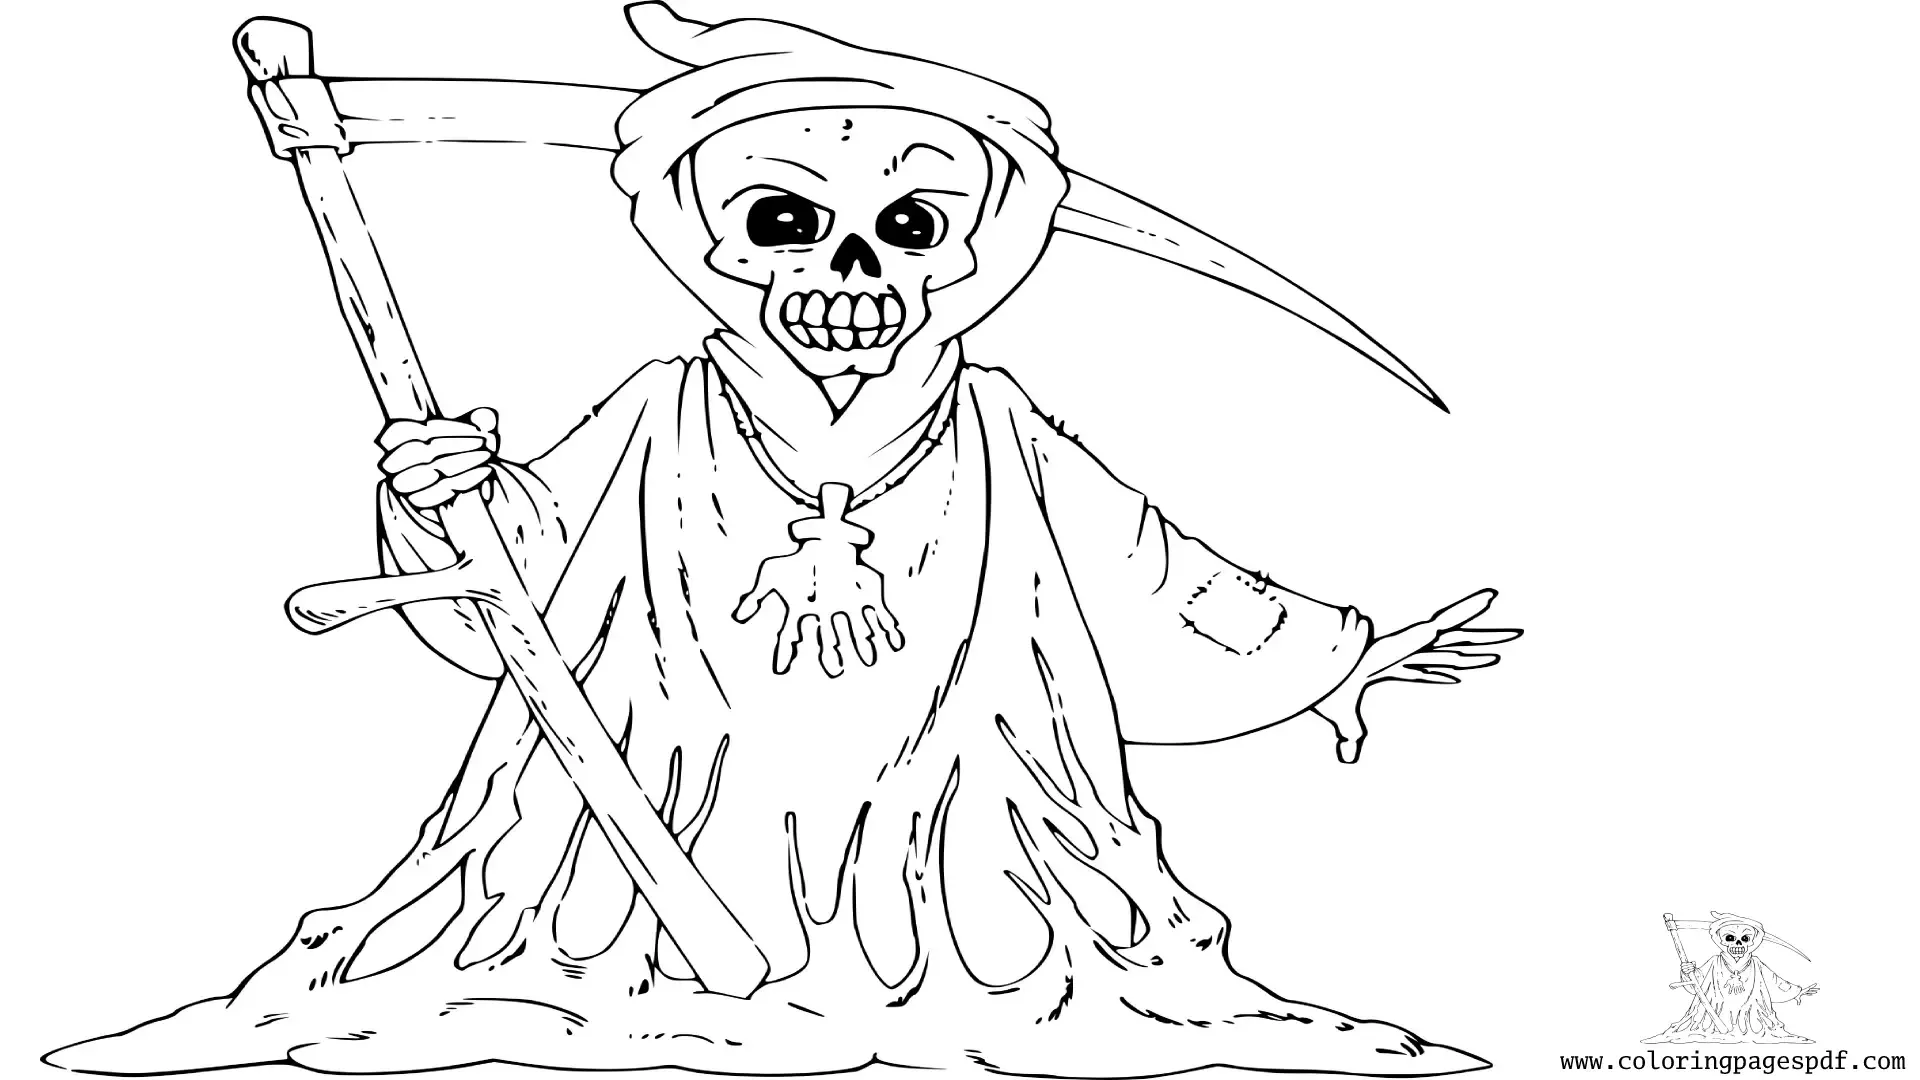 Coloring Page Of Grim Reaper